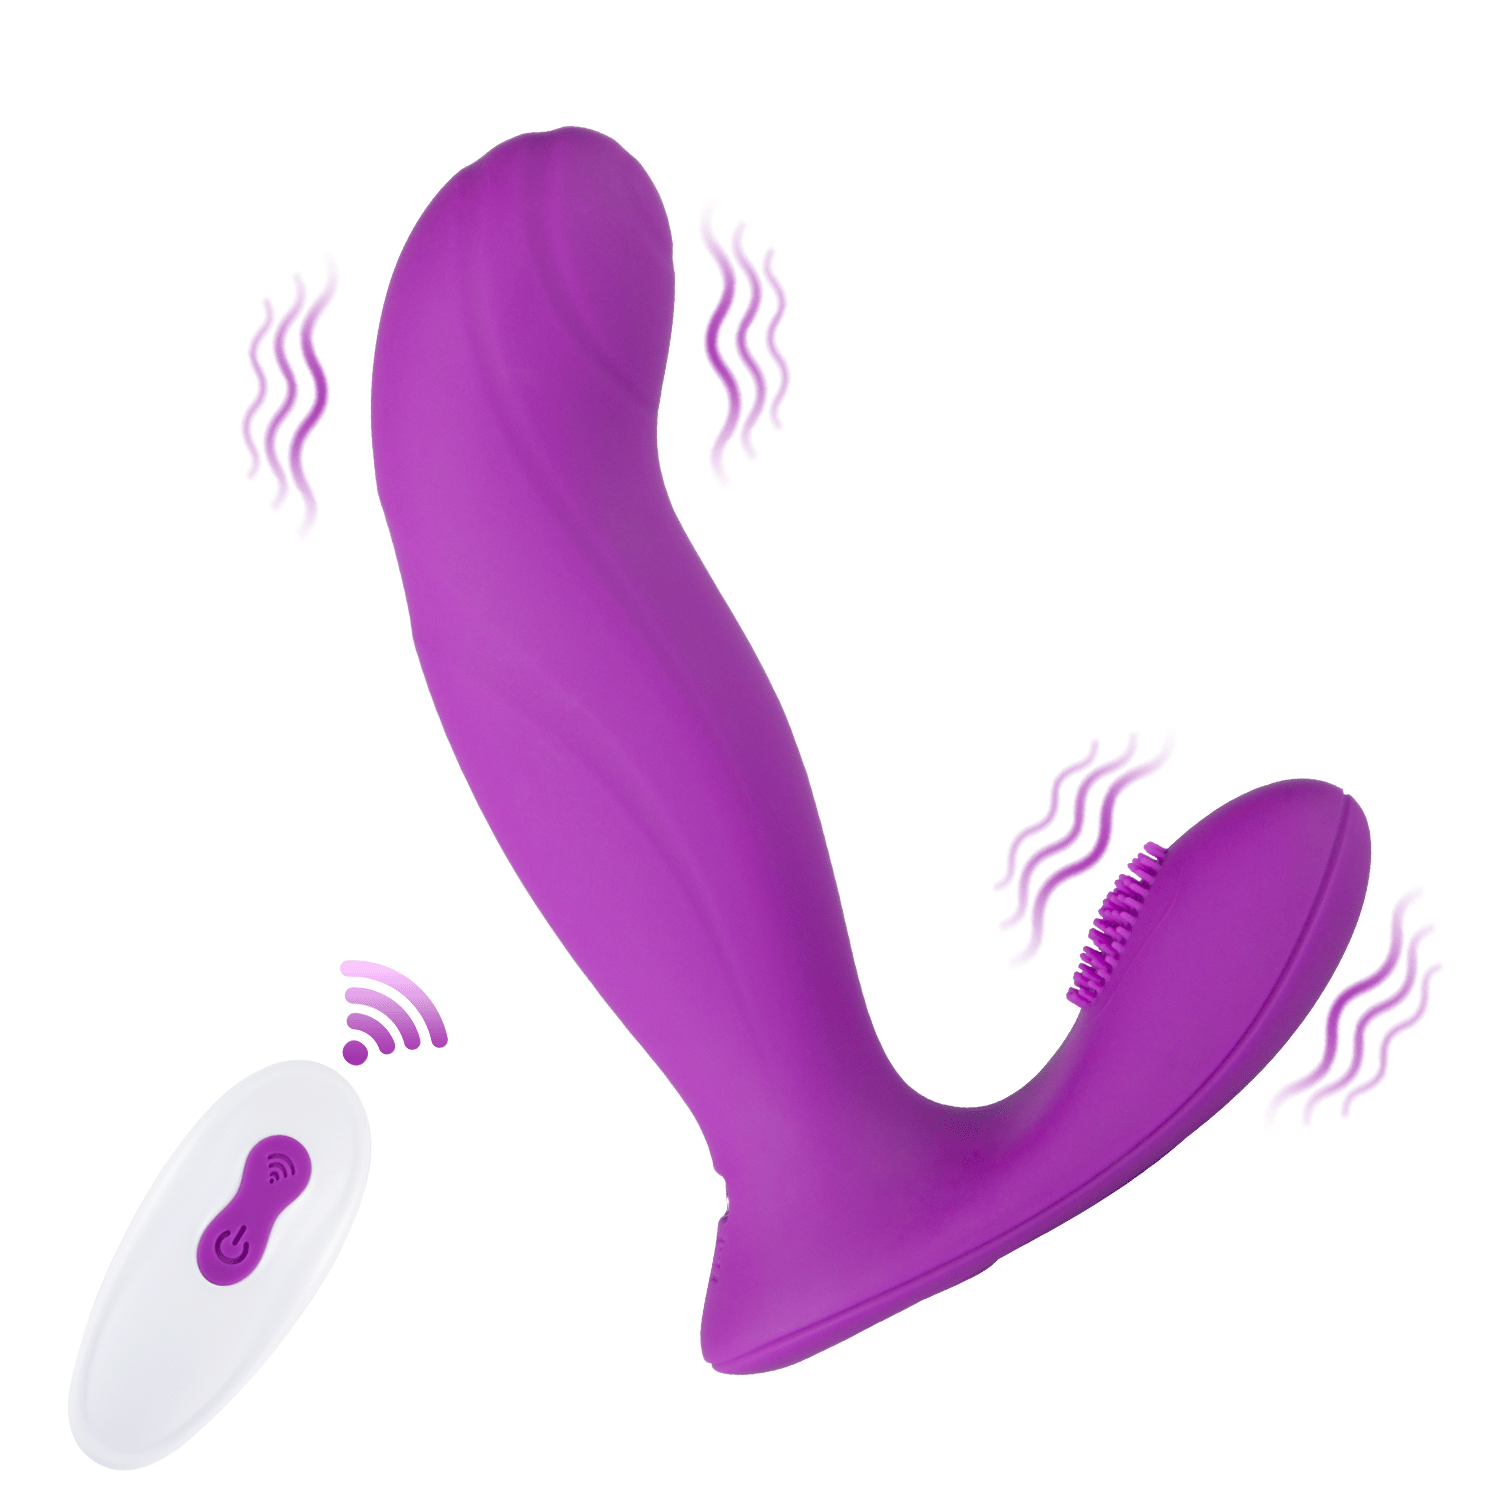 asi lee recommends g spot vibrator gif pic